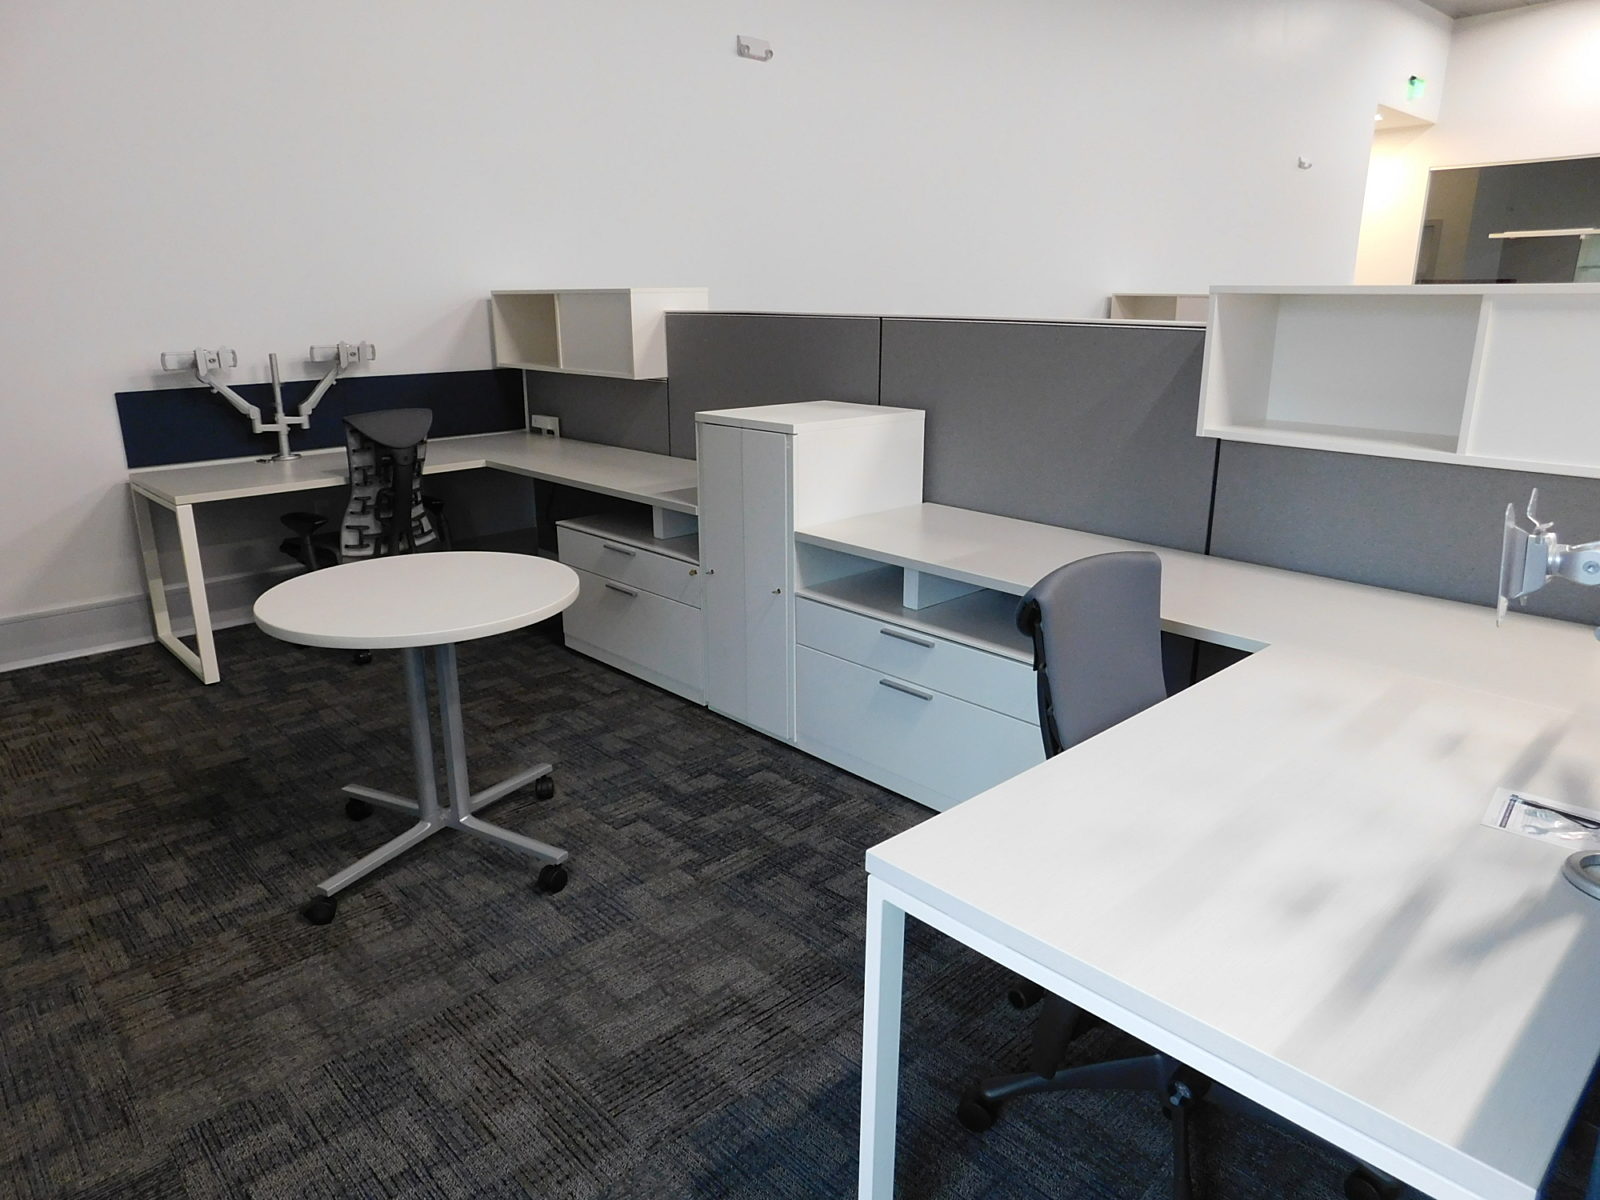 Herman Miller workstations with white surfaces and storage, grey fabric panels, small round table in between